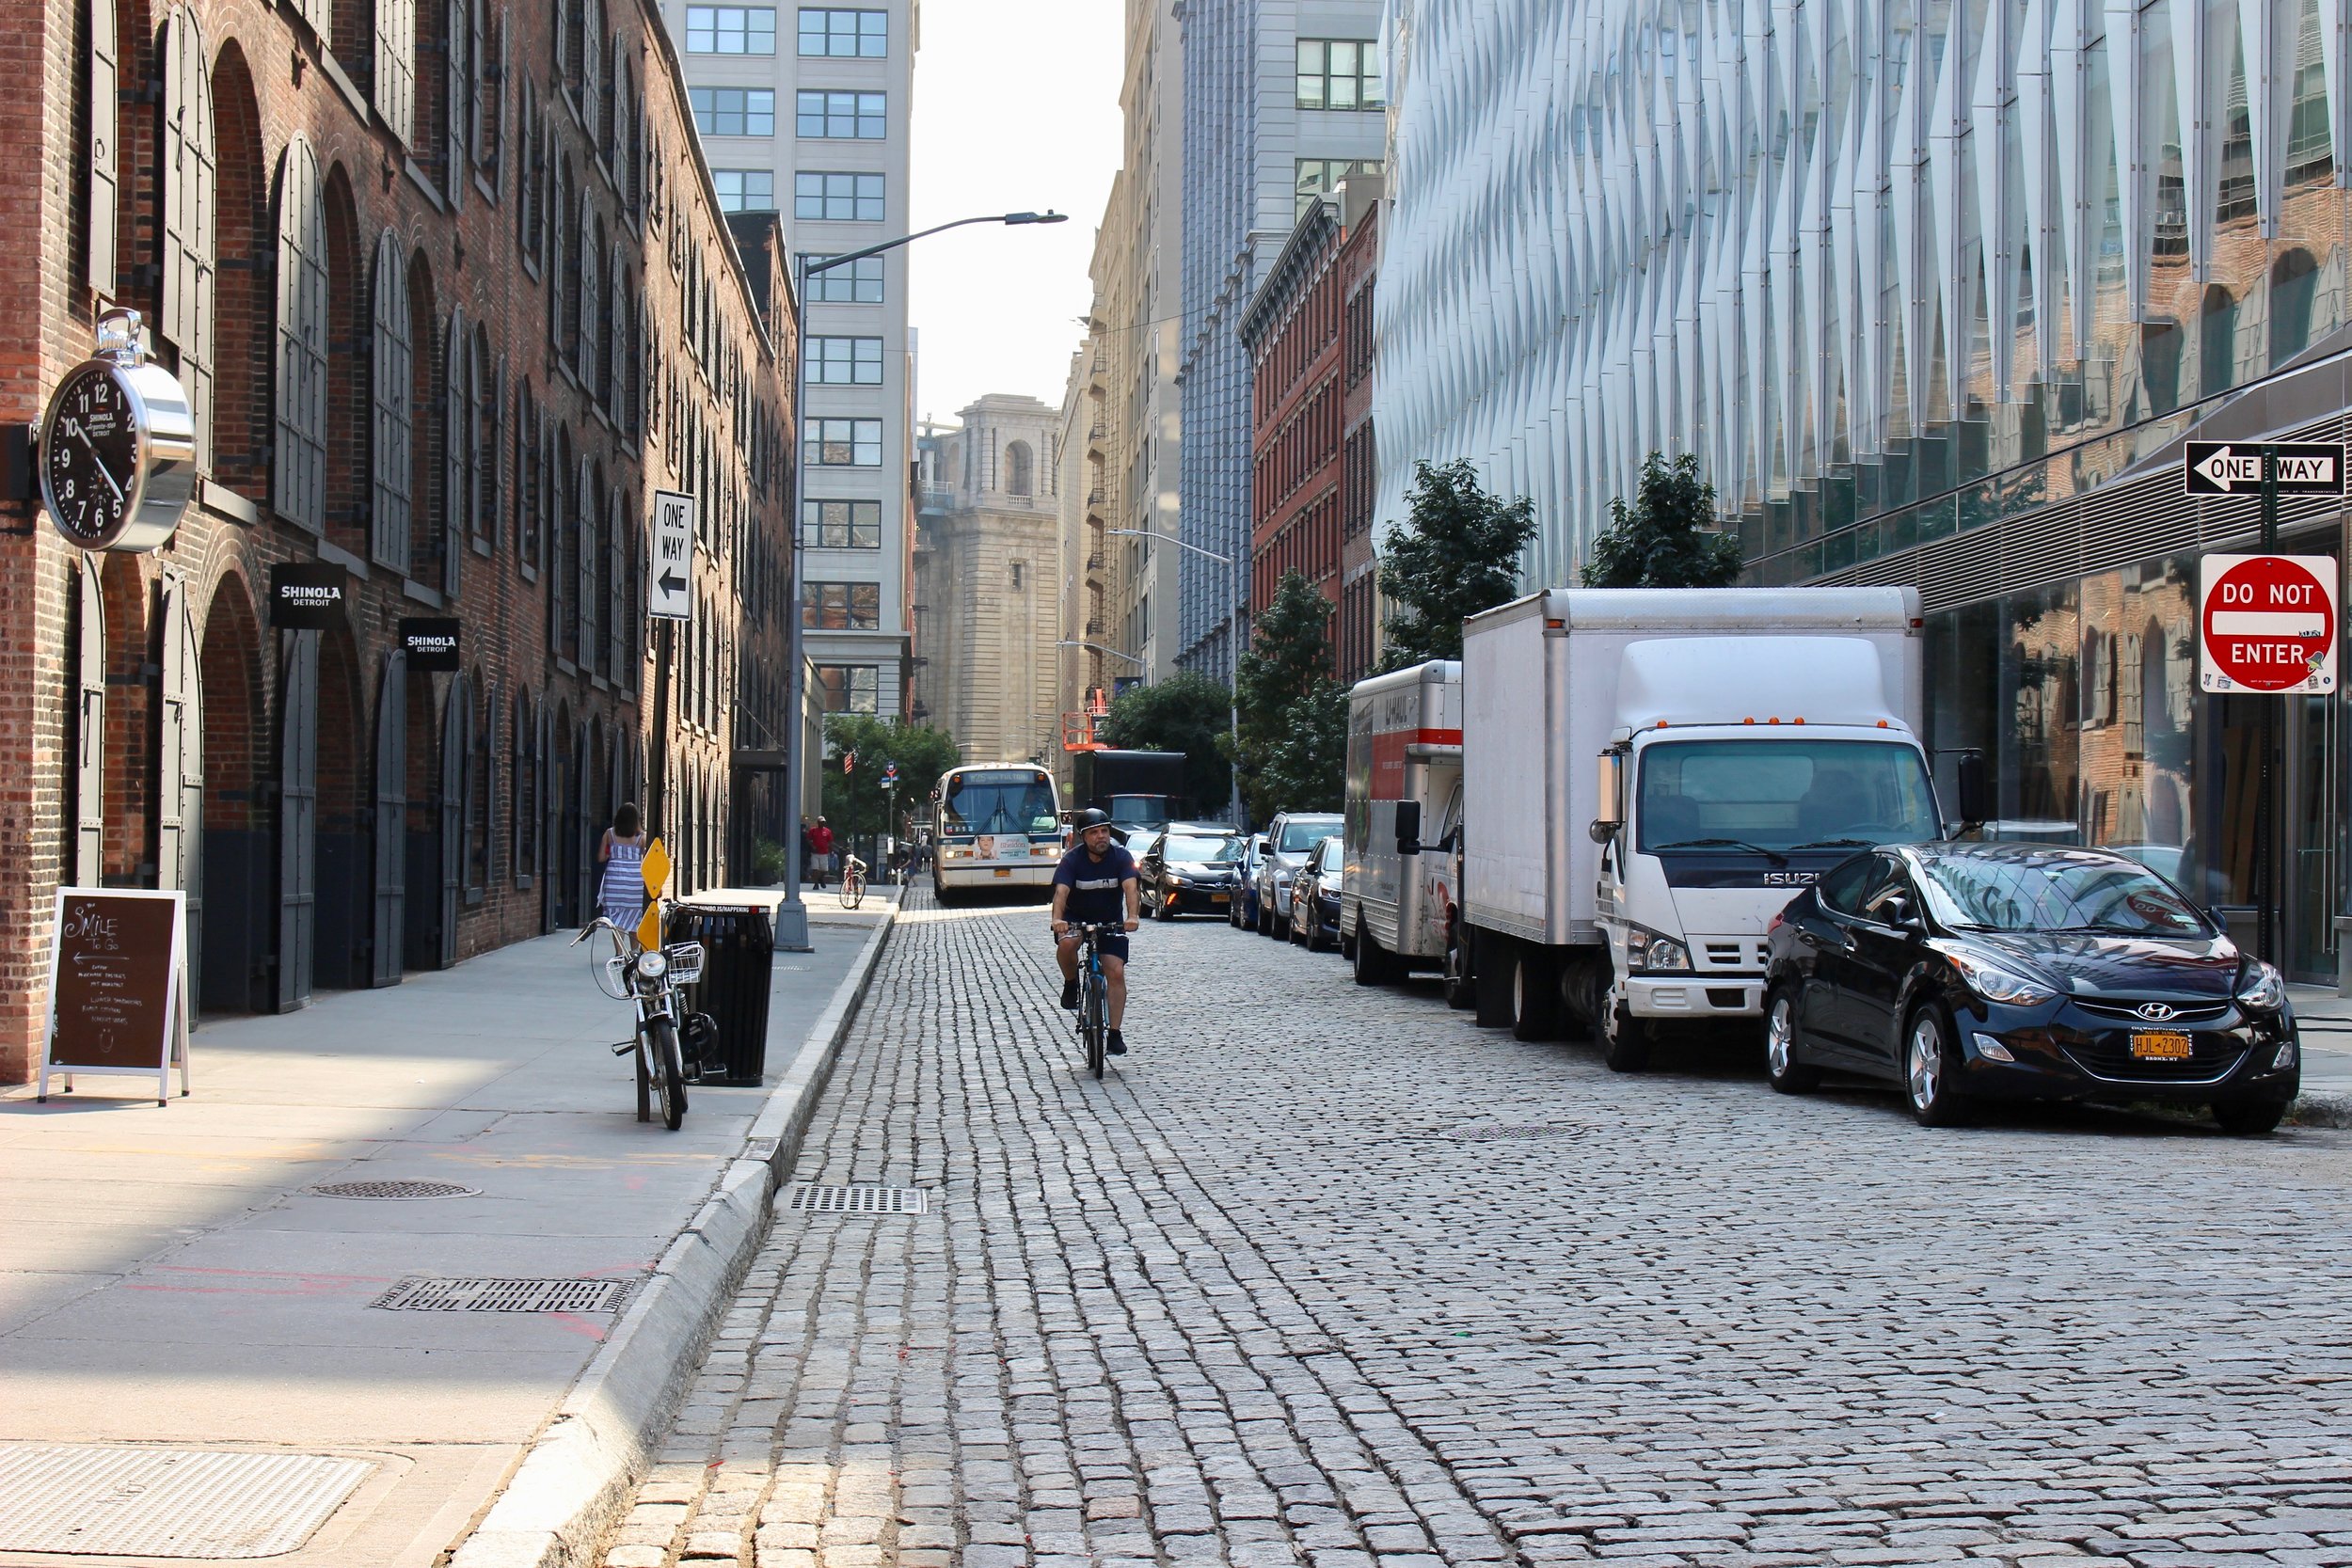  Looking north on Water Street.&nbsp; Past Main Street you can see the Manhattan Bridge stanchion. Note the cobble stone street, which is the case throughout DUMBO.&nbsp; Bicyclists, buses, cars, and pedestrians happily go about their business on the